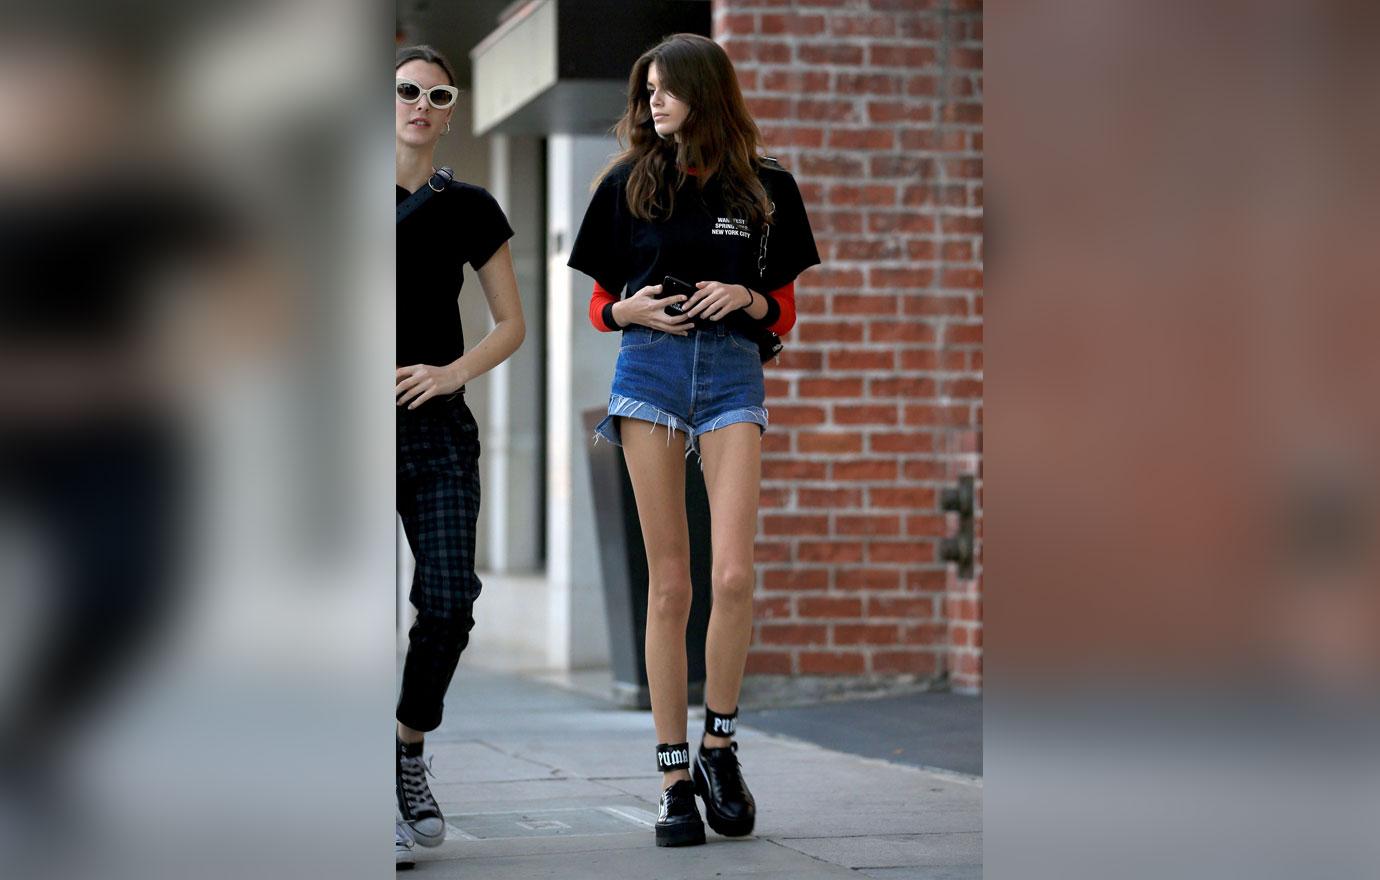 tigger Great Barrier Reef nedadgående Kaia Gerber Worries Fans With Scary Skinny Legs In Tiny Shorts